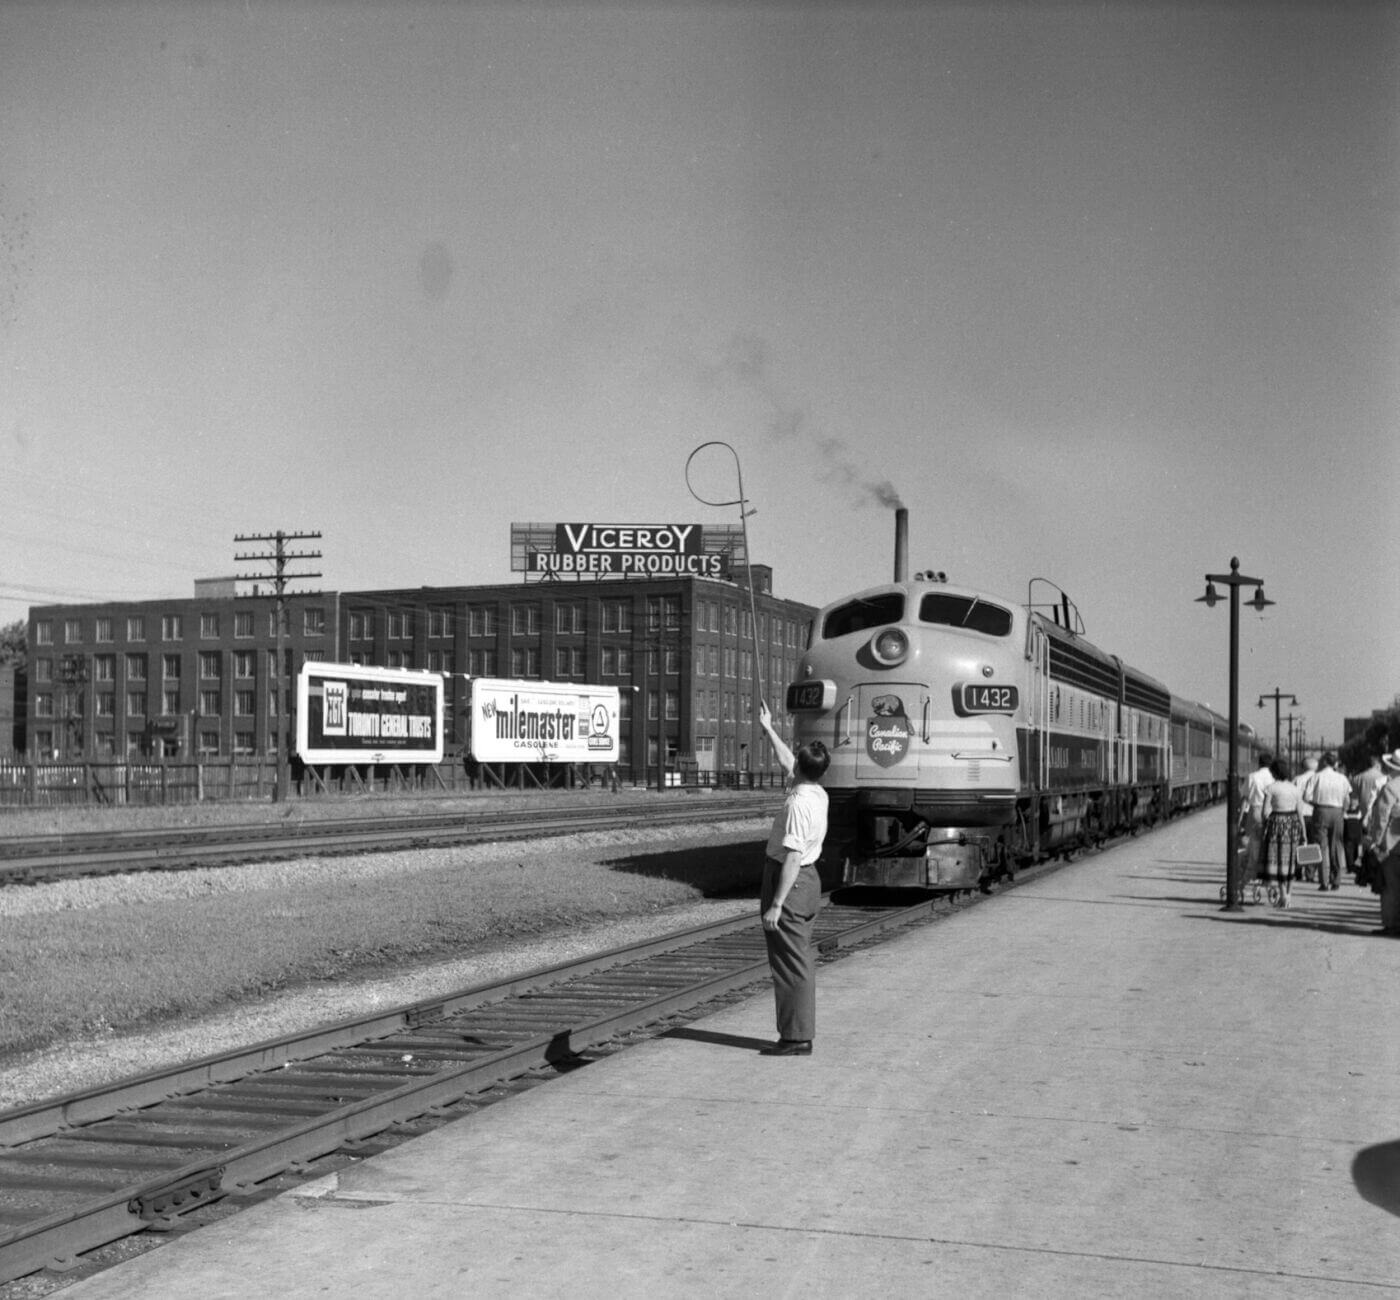 Black and white photo of a man in 50s clothing standing on a train platform waving at the approaching train. In the background is a building with a large sign that reads, "Viceroy rubber products". Two billboards it along side the opposite side of the tracks with advertisements on them, and a group of people walk away from the camera on the train platform in the corner of the photo.